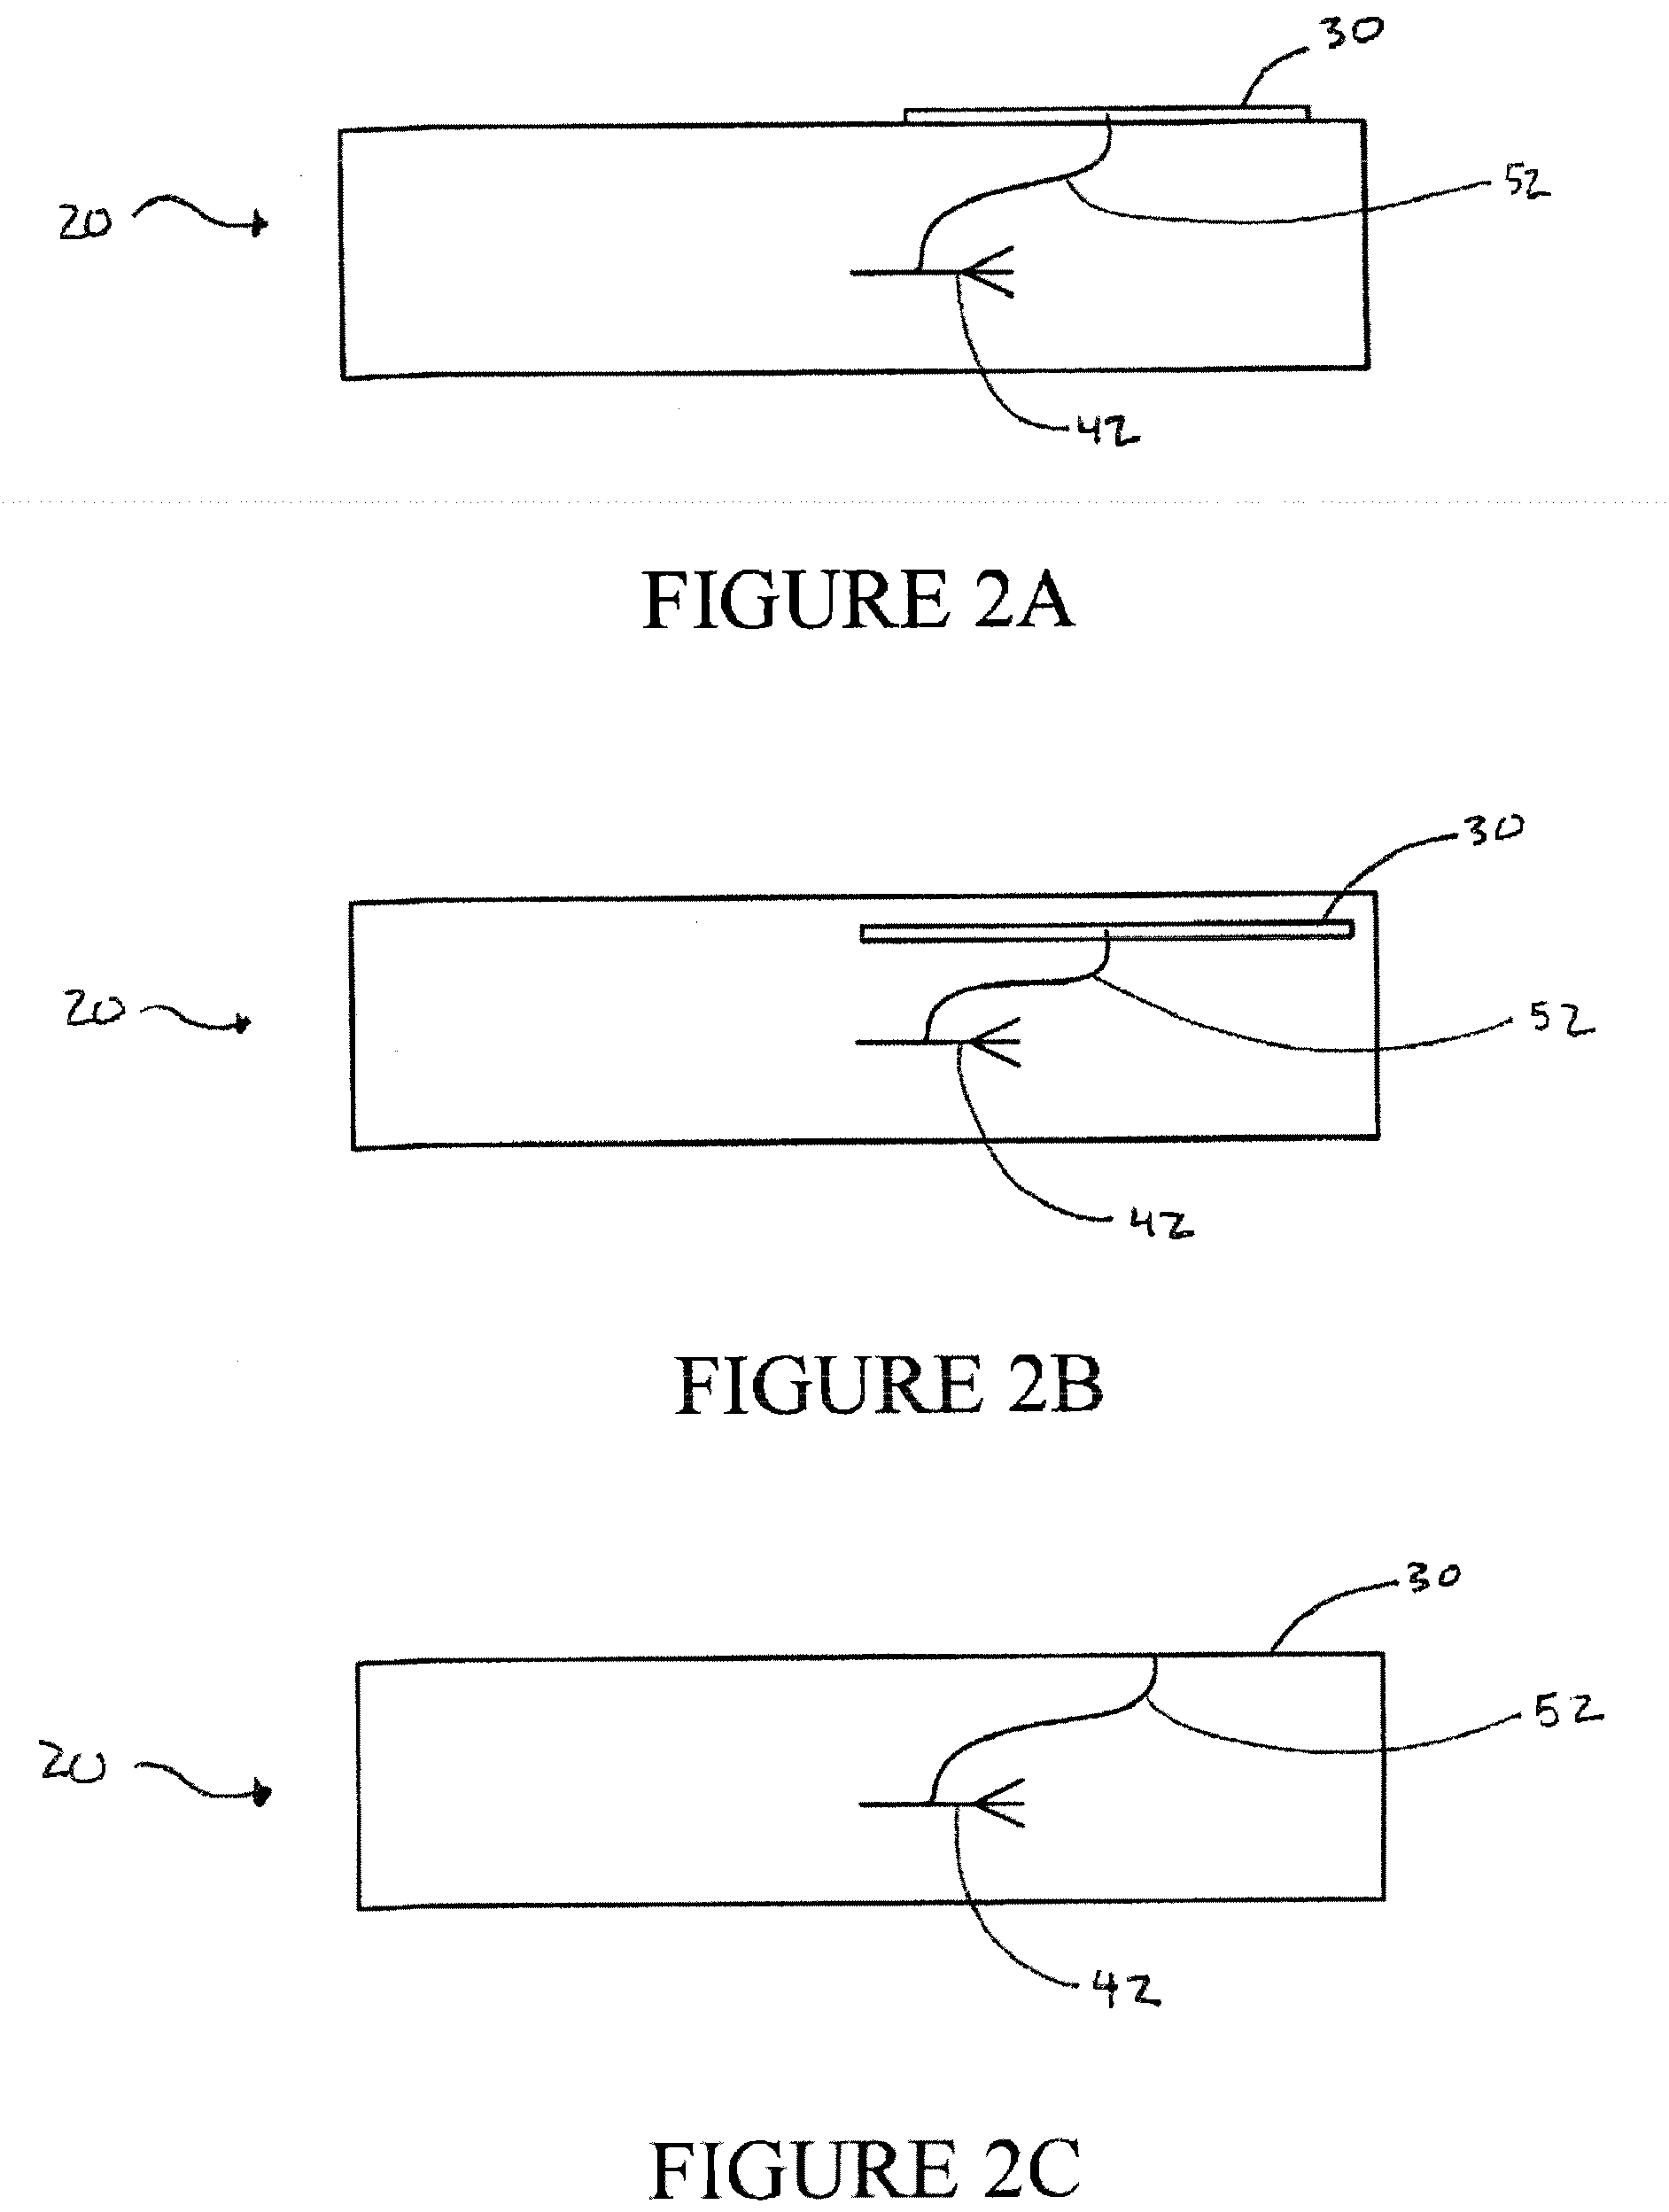 Antenna configured for low frequency applications